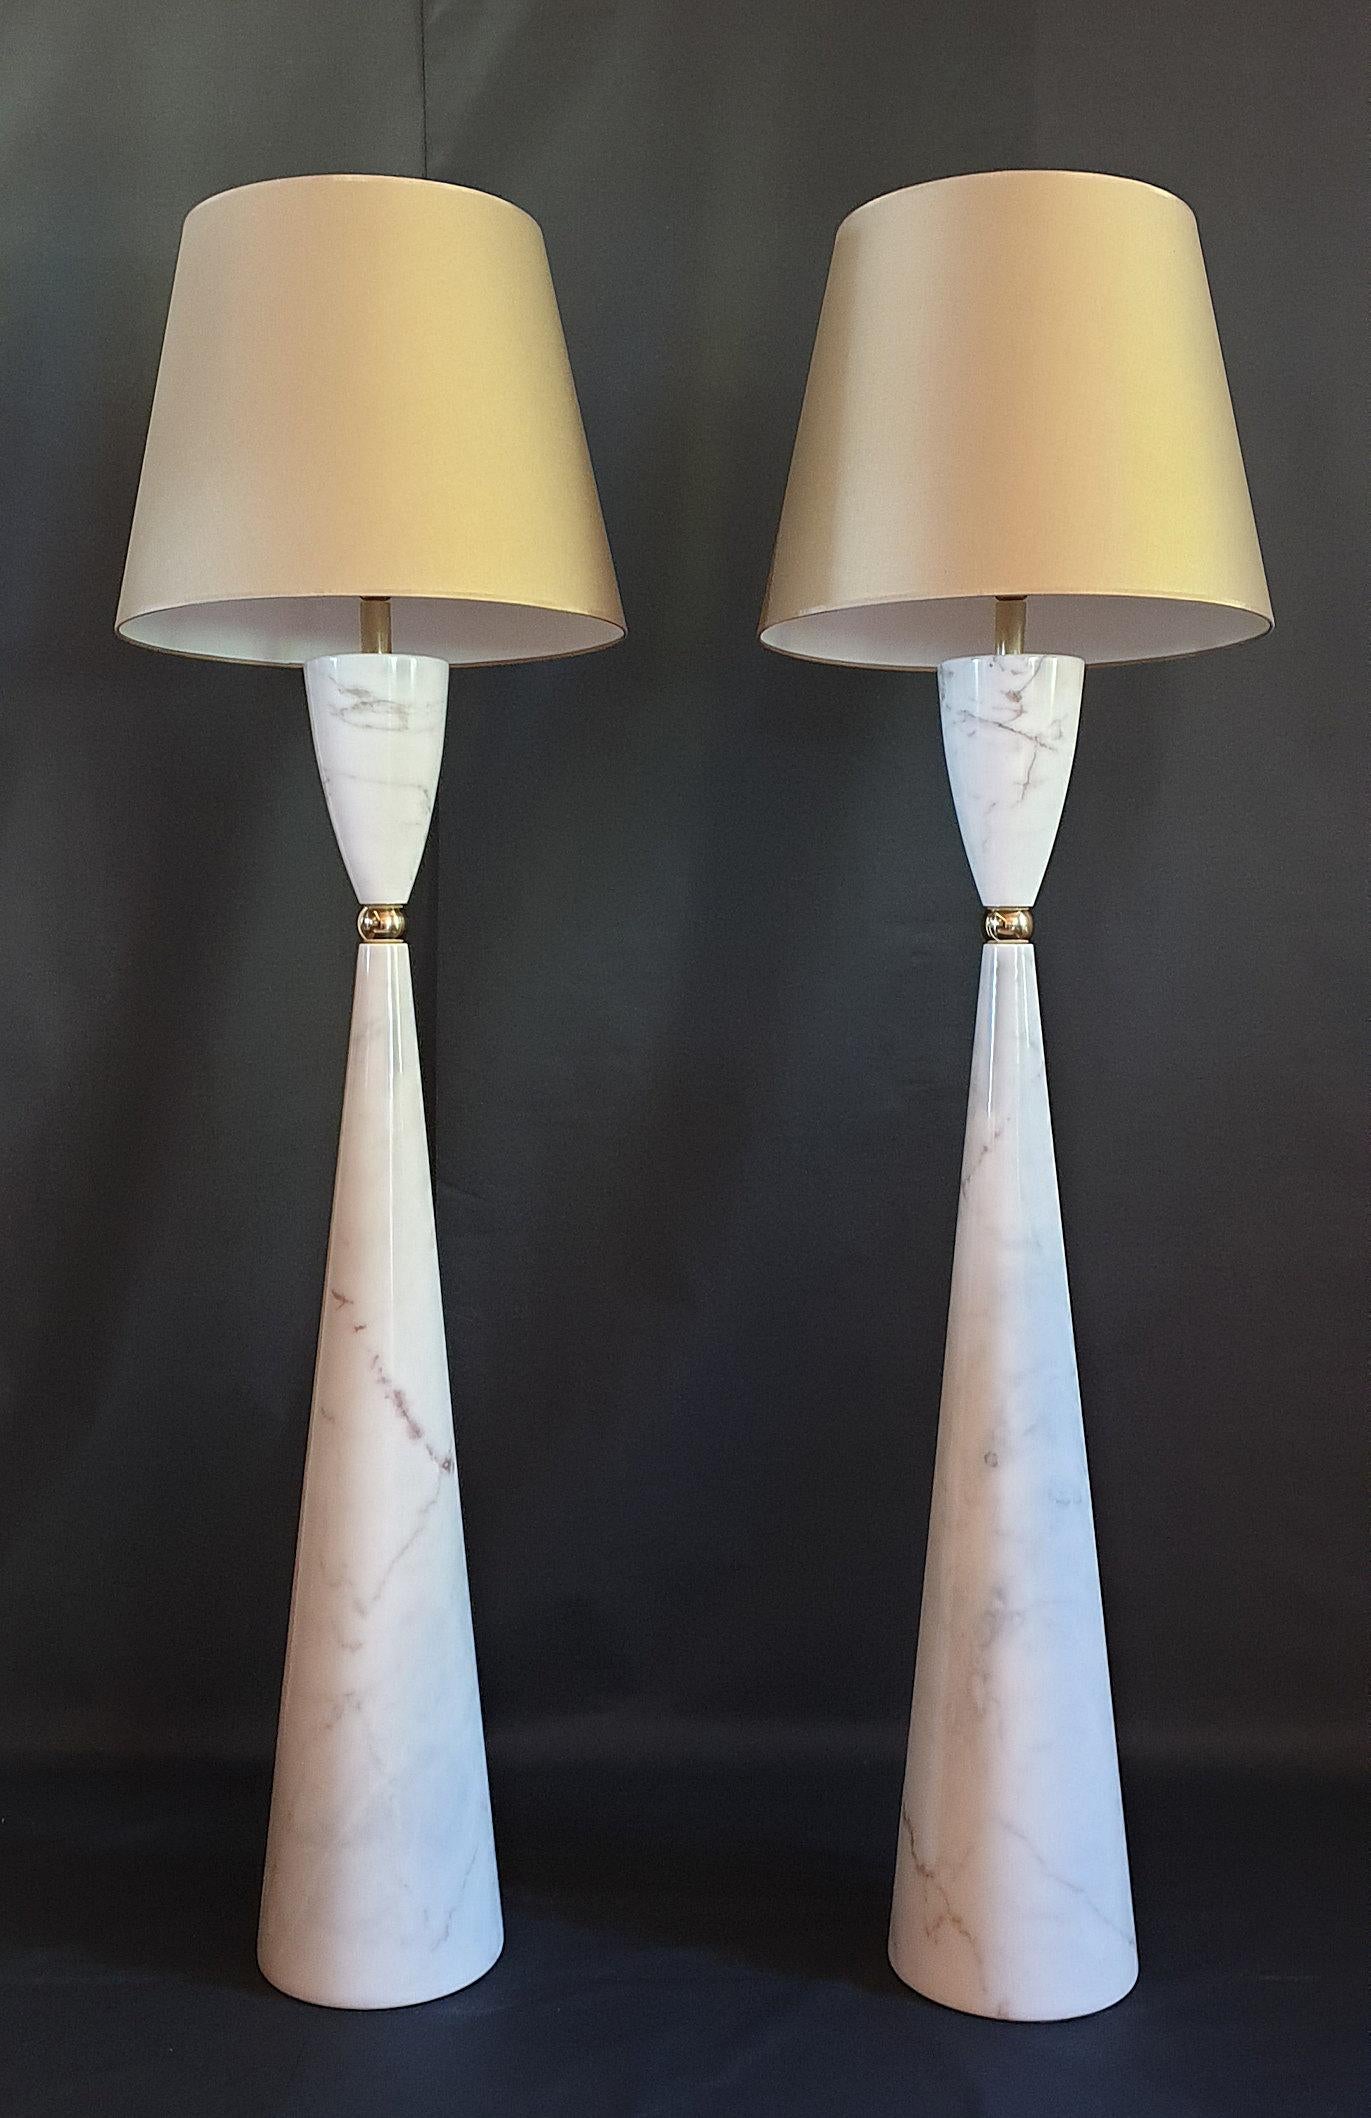 Pair of beige with brown veins marble and brass floor lamps.
Mid-Century Modern floor lamps, from Italy, 1980s.
Composed of a very large cylinder at the base, a brass ball and a smaller top cylinder, holding the brass wiring.
1 light each, medium